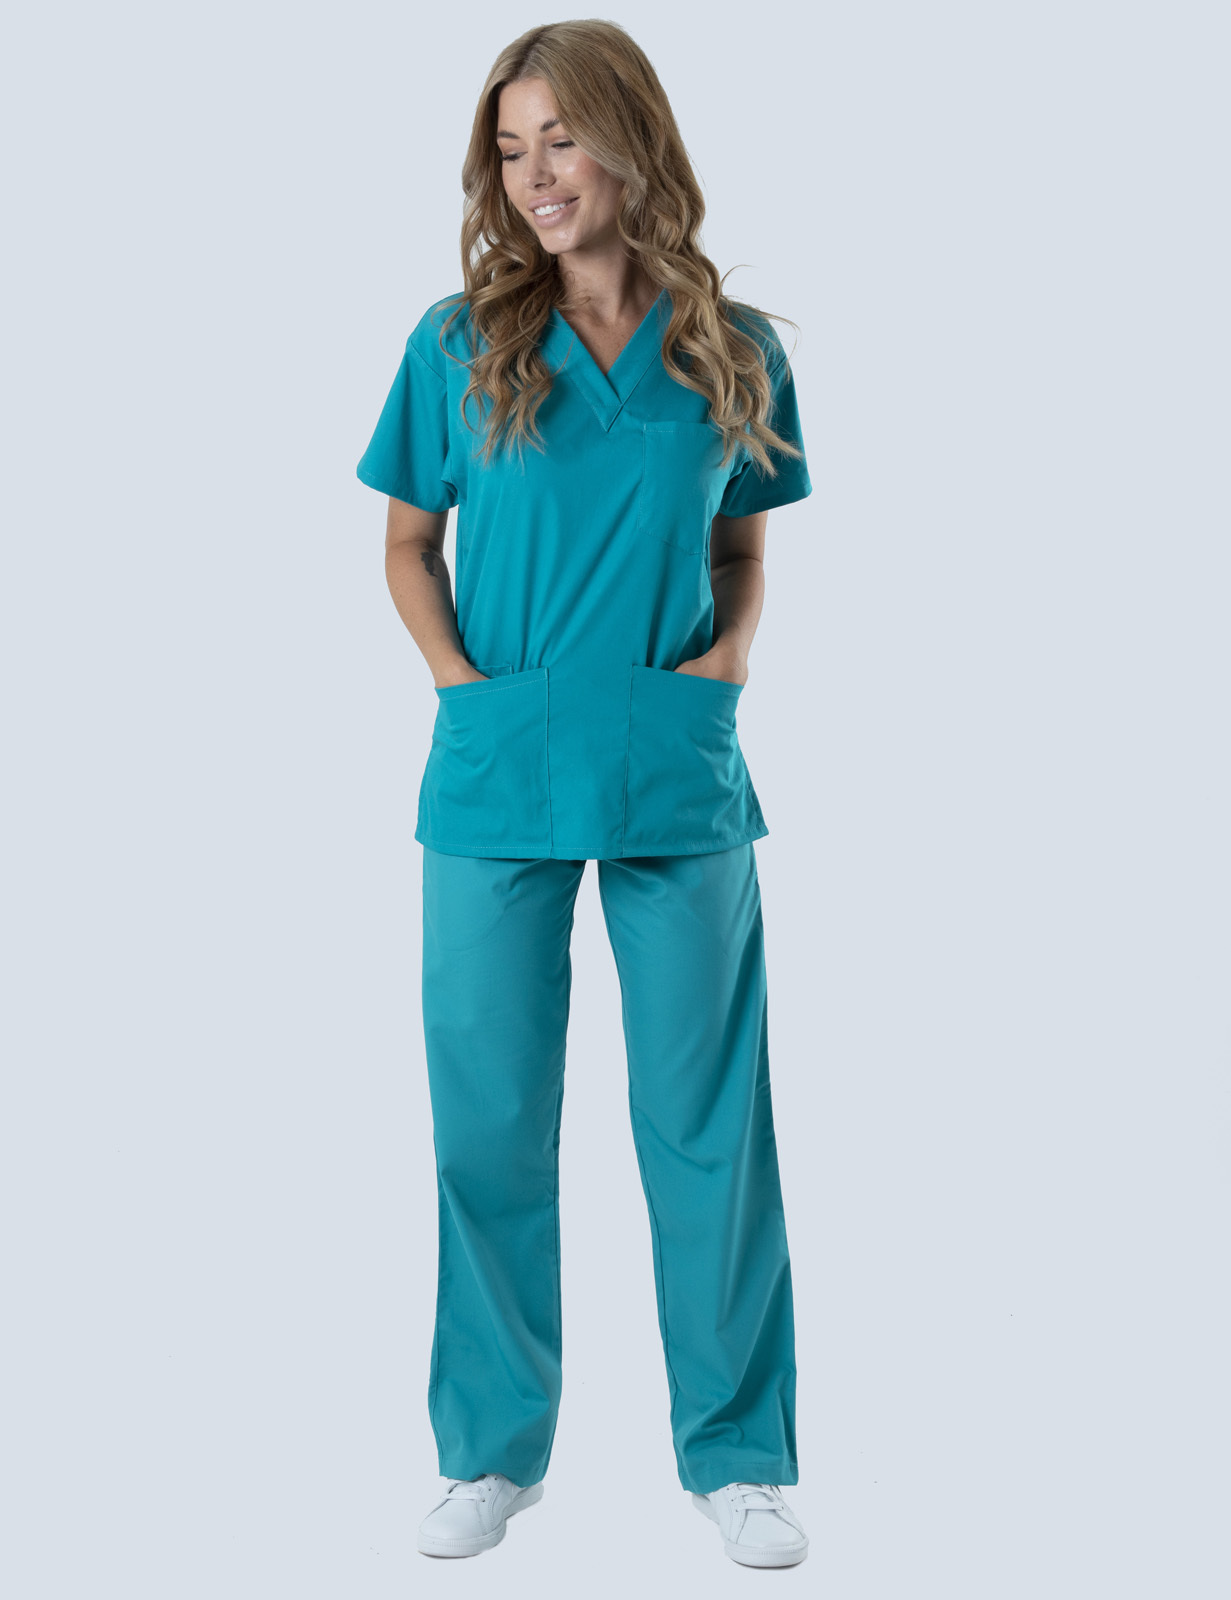 RBWH - IMS CCU RN (4 Pocket Scrub Top and Cargo Pants in Teal incl Logos)